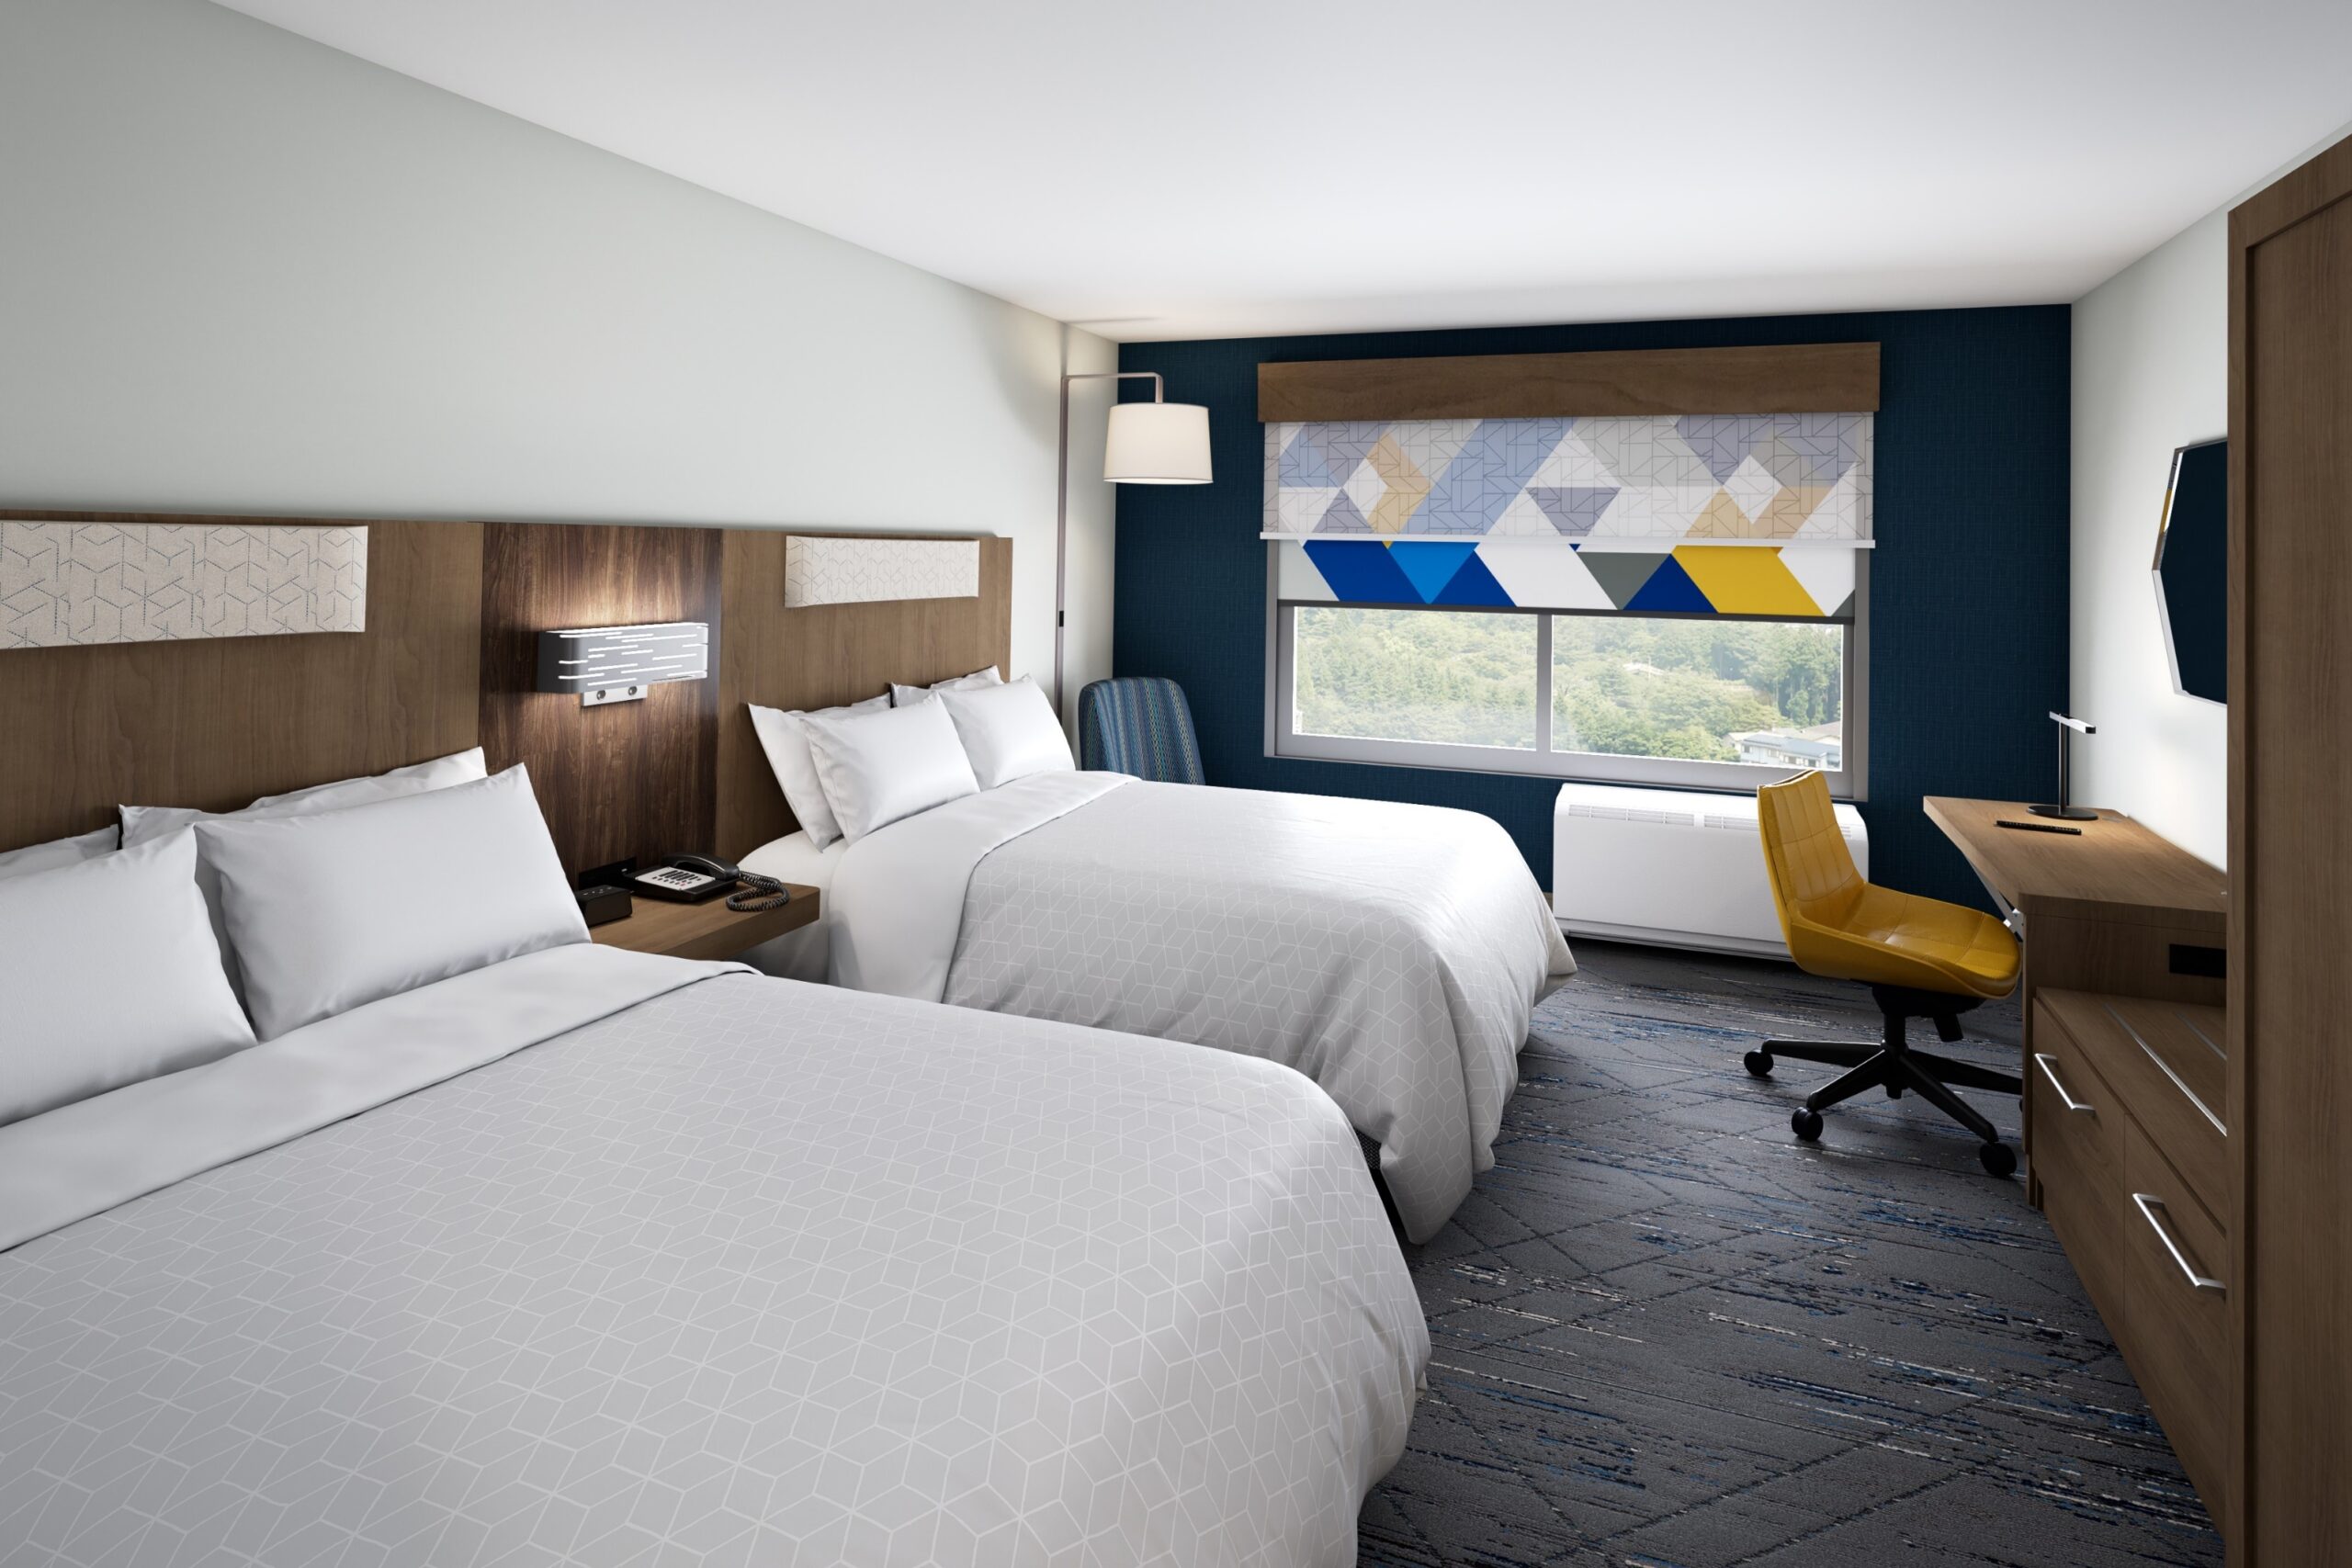 Hotel room with two queen size beds and blue, white, and yellow checkered curtain